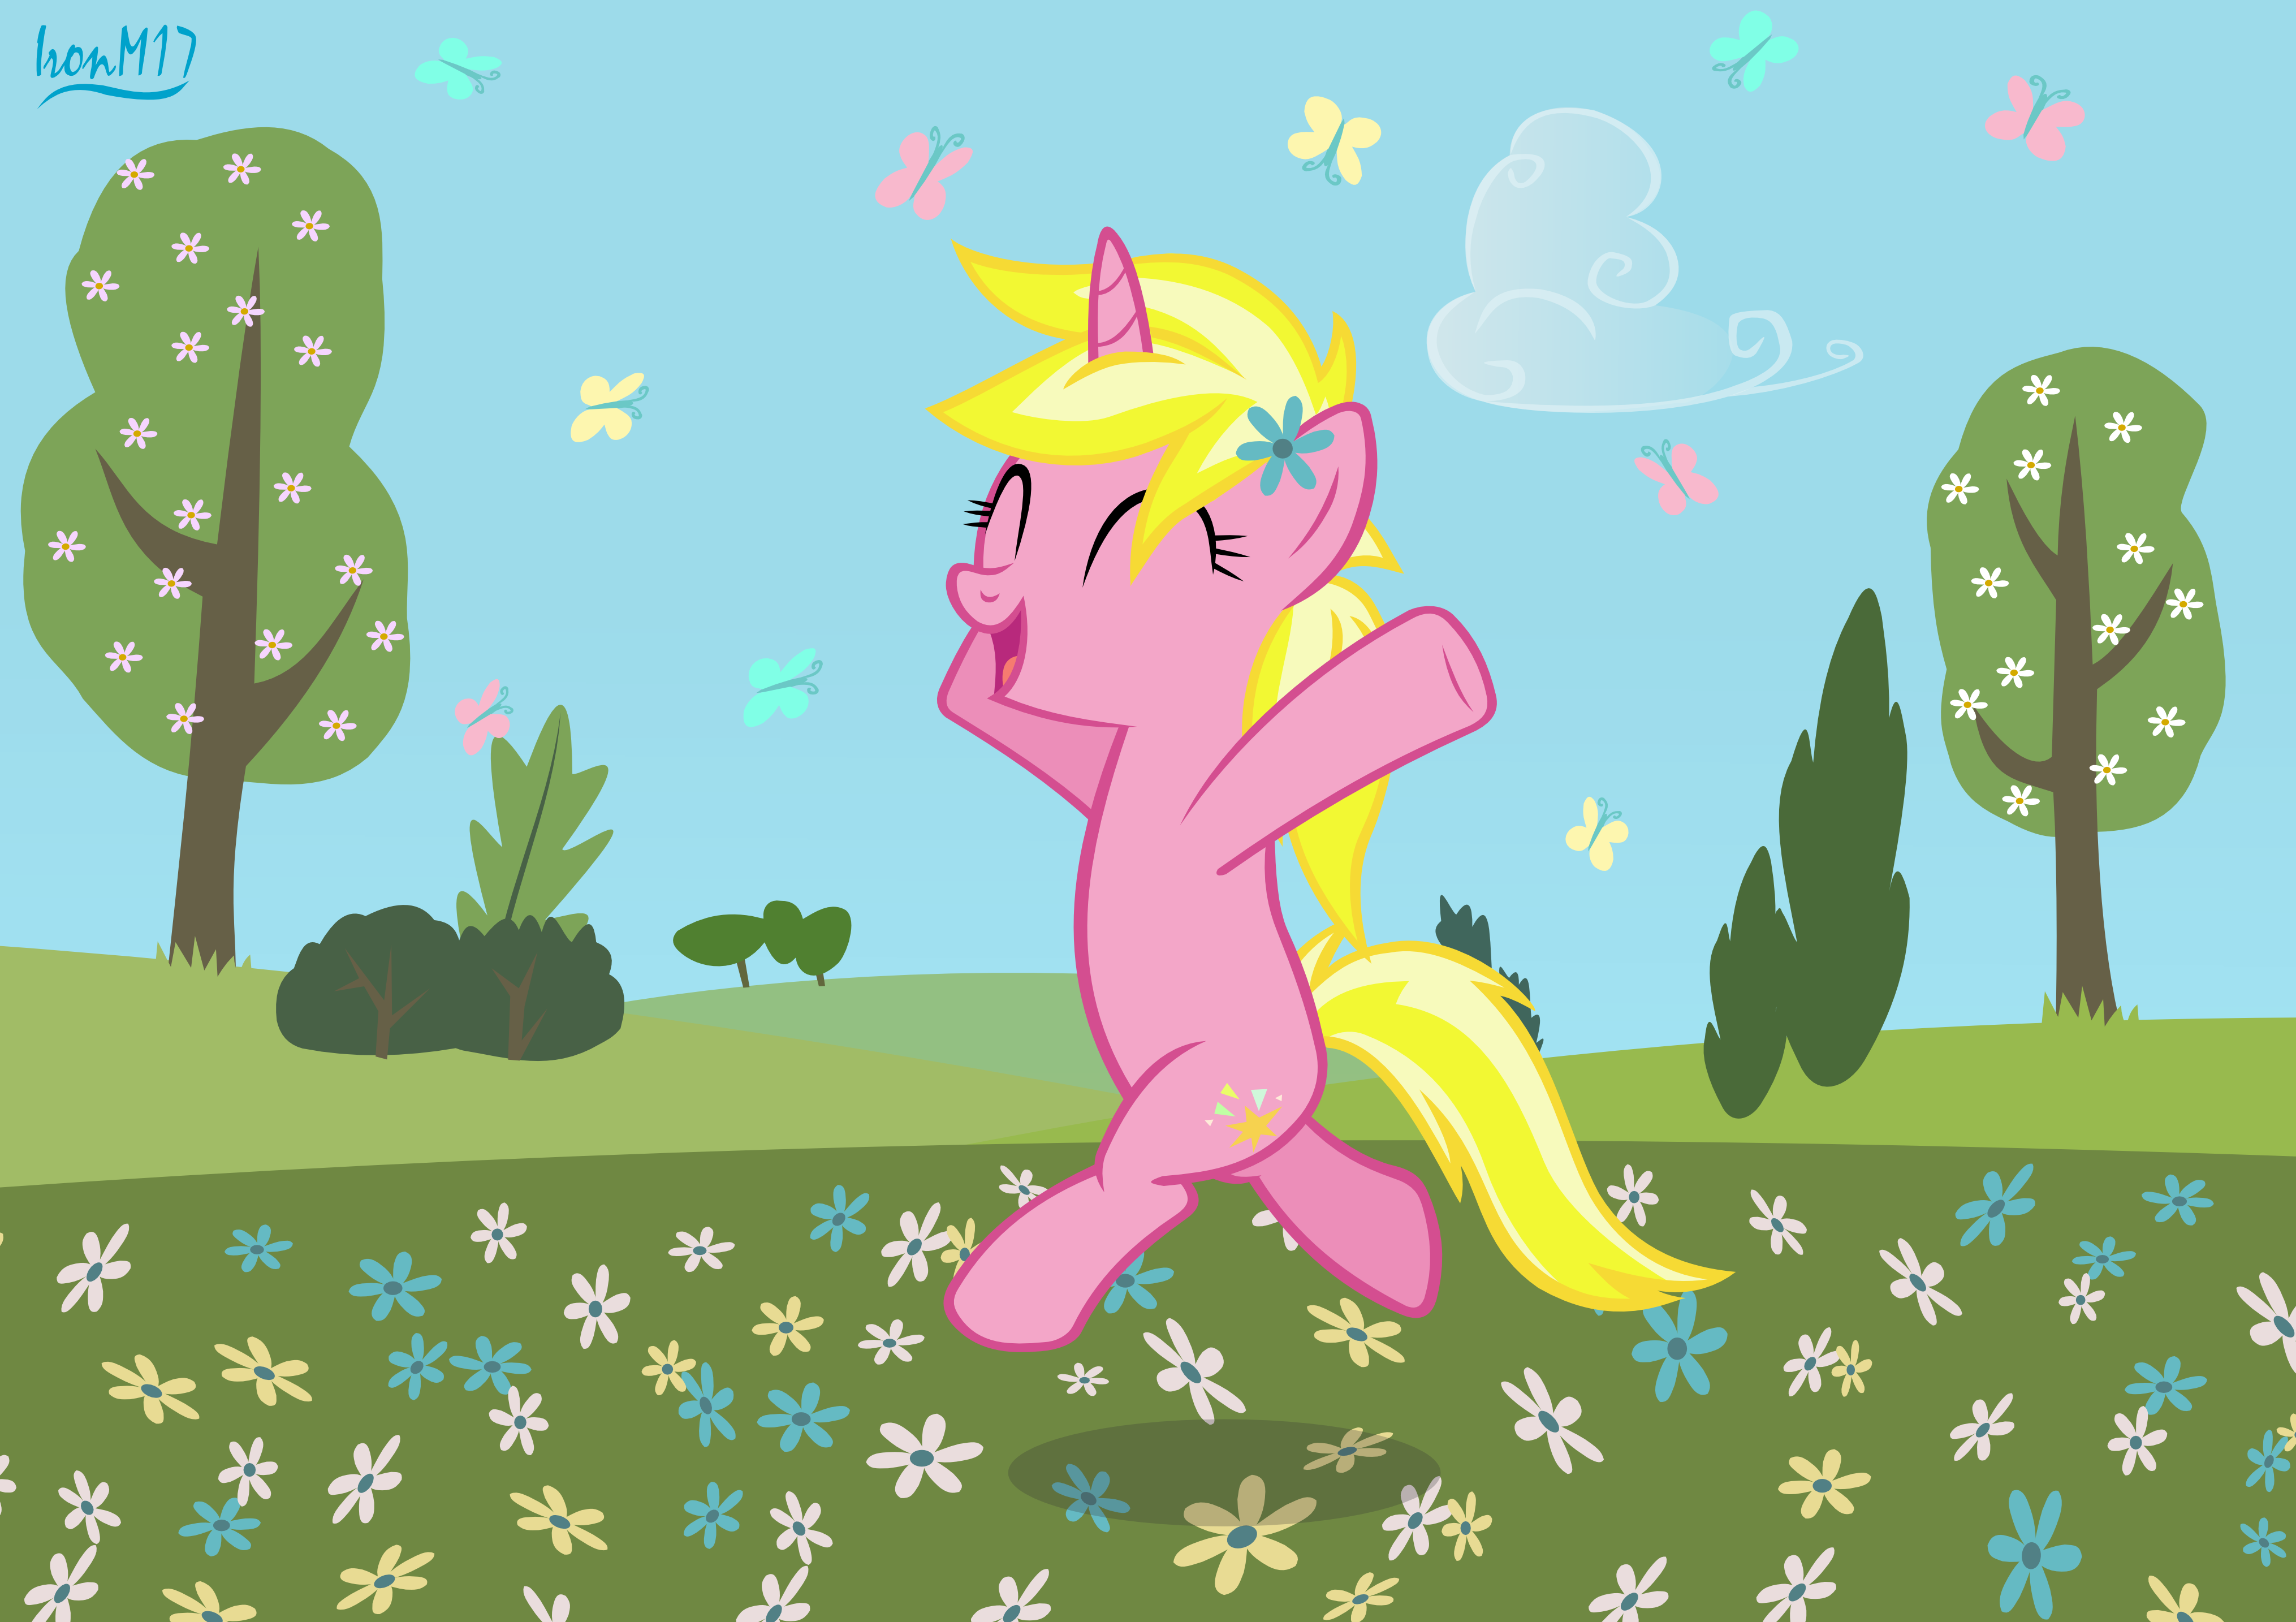 spring_by_ironm17-dcaispi.png